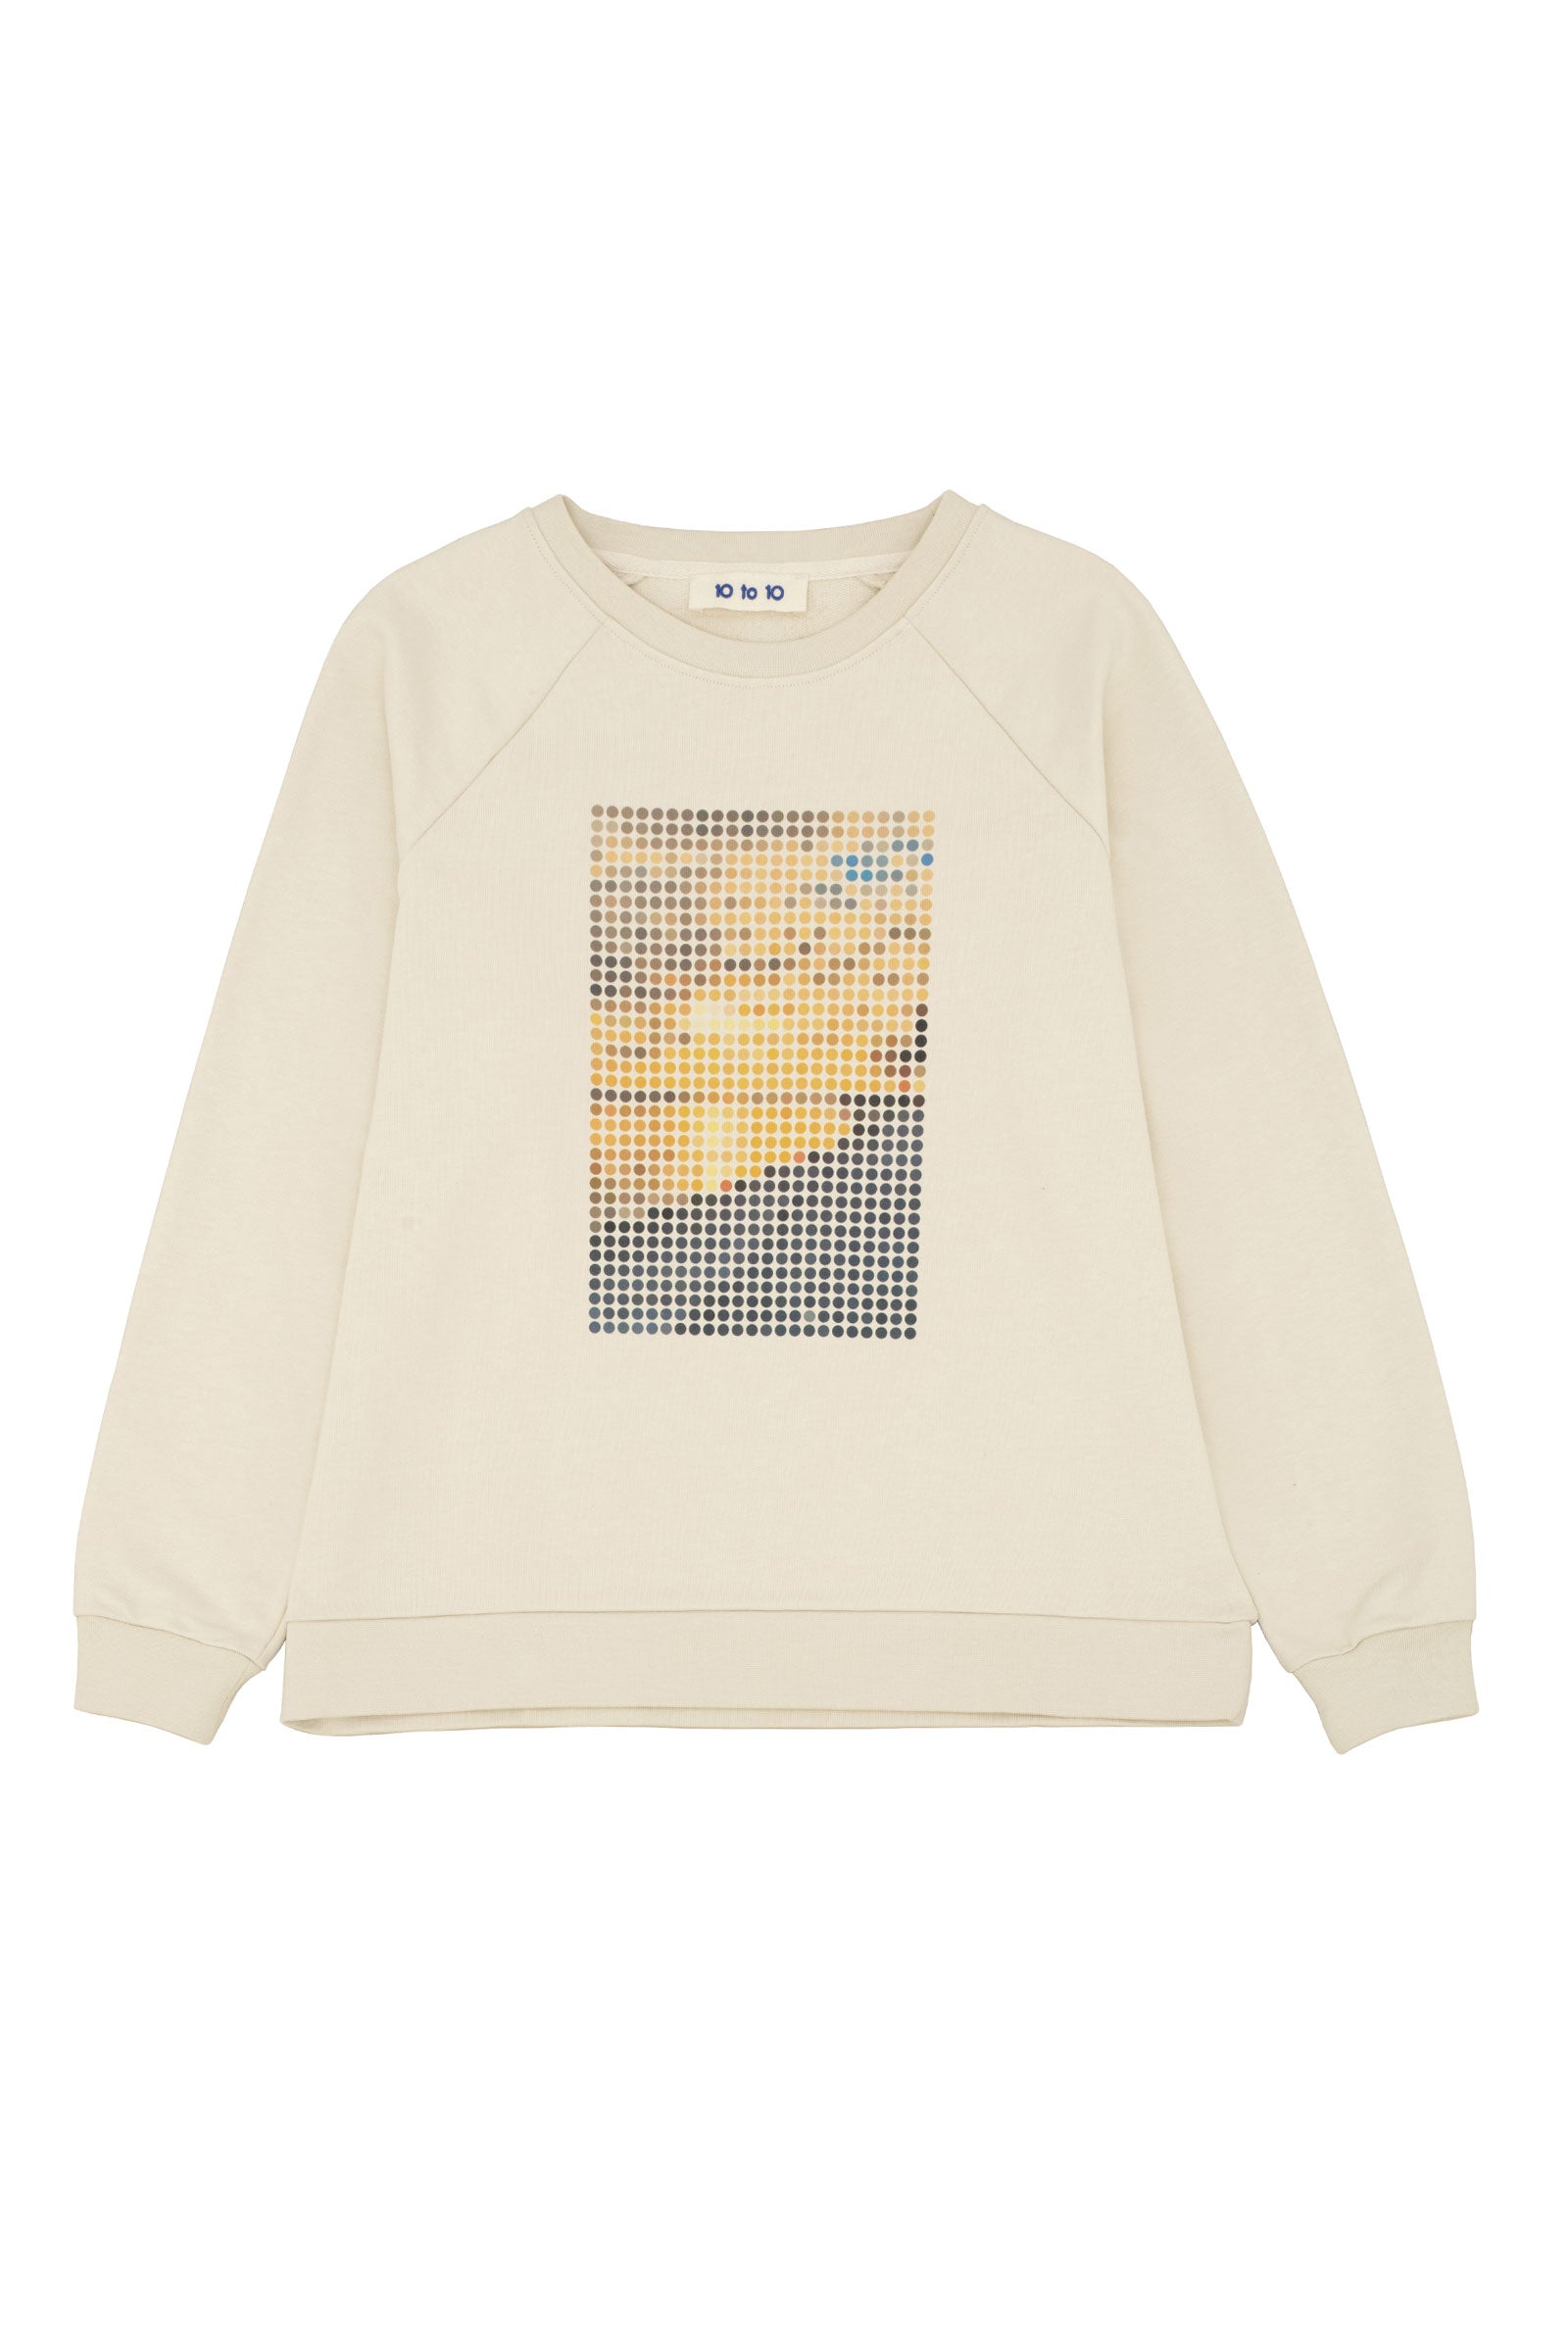 10 to 10 Unisex sweatshirt with Dots print representing a sunset by the sea